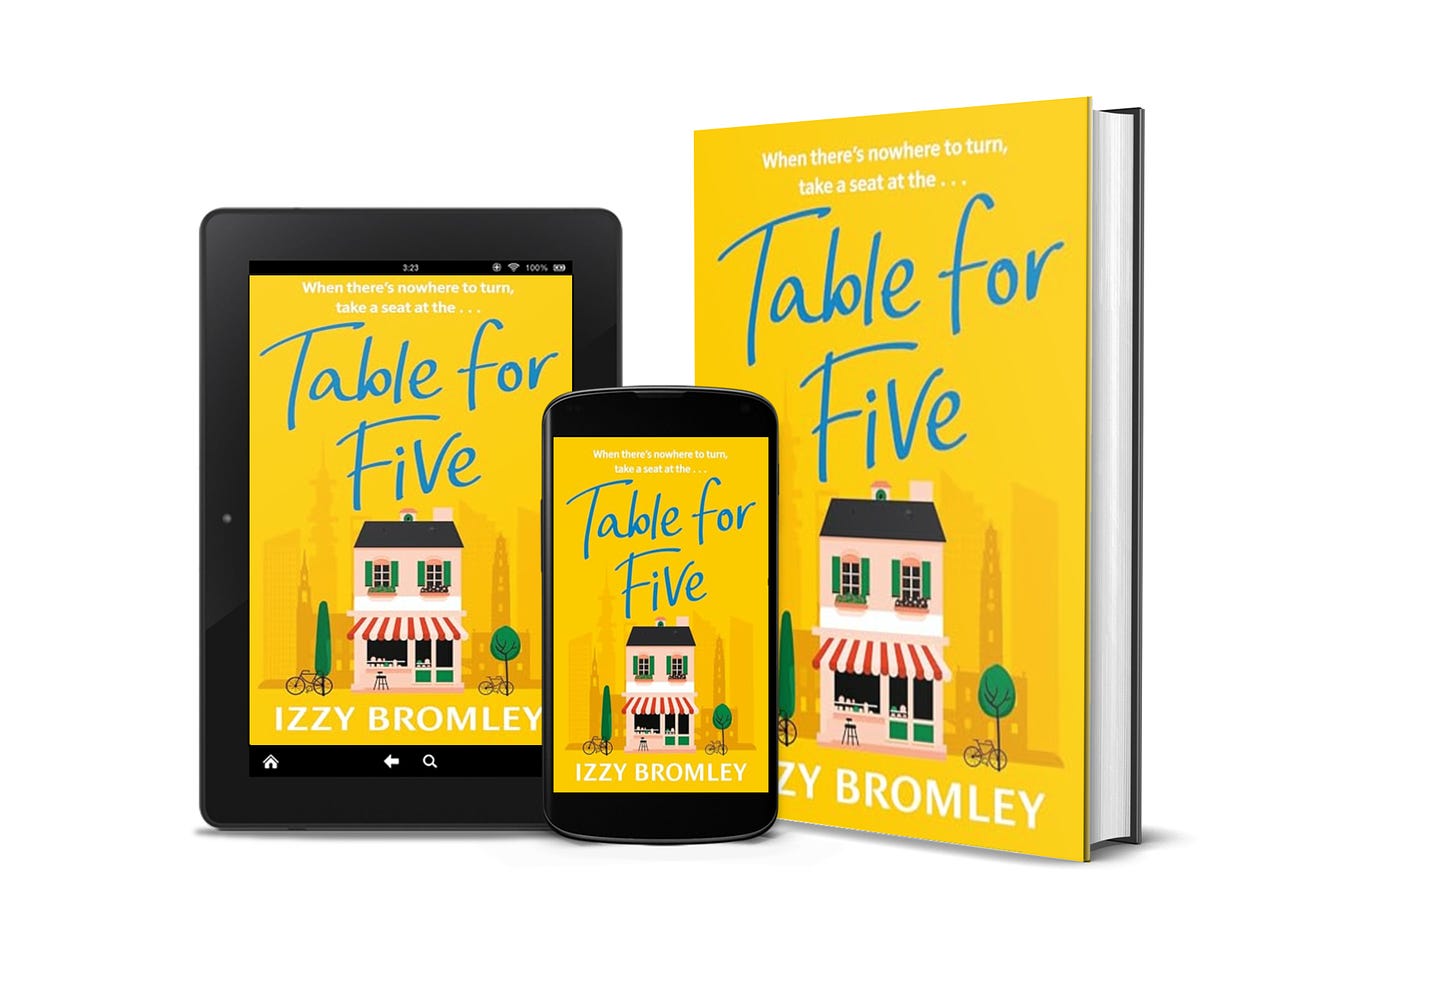 Image shows copies of Table for Five by Izzy Bromley